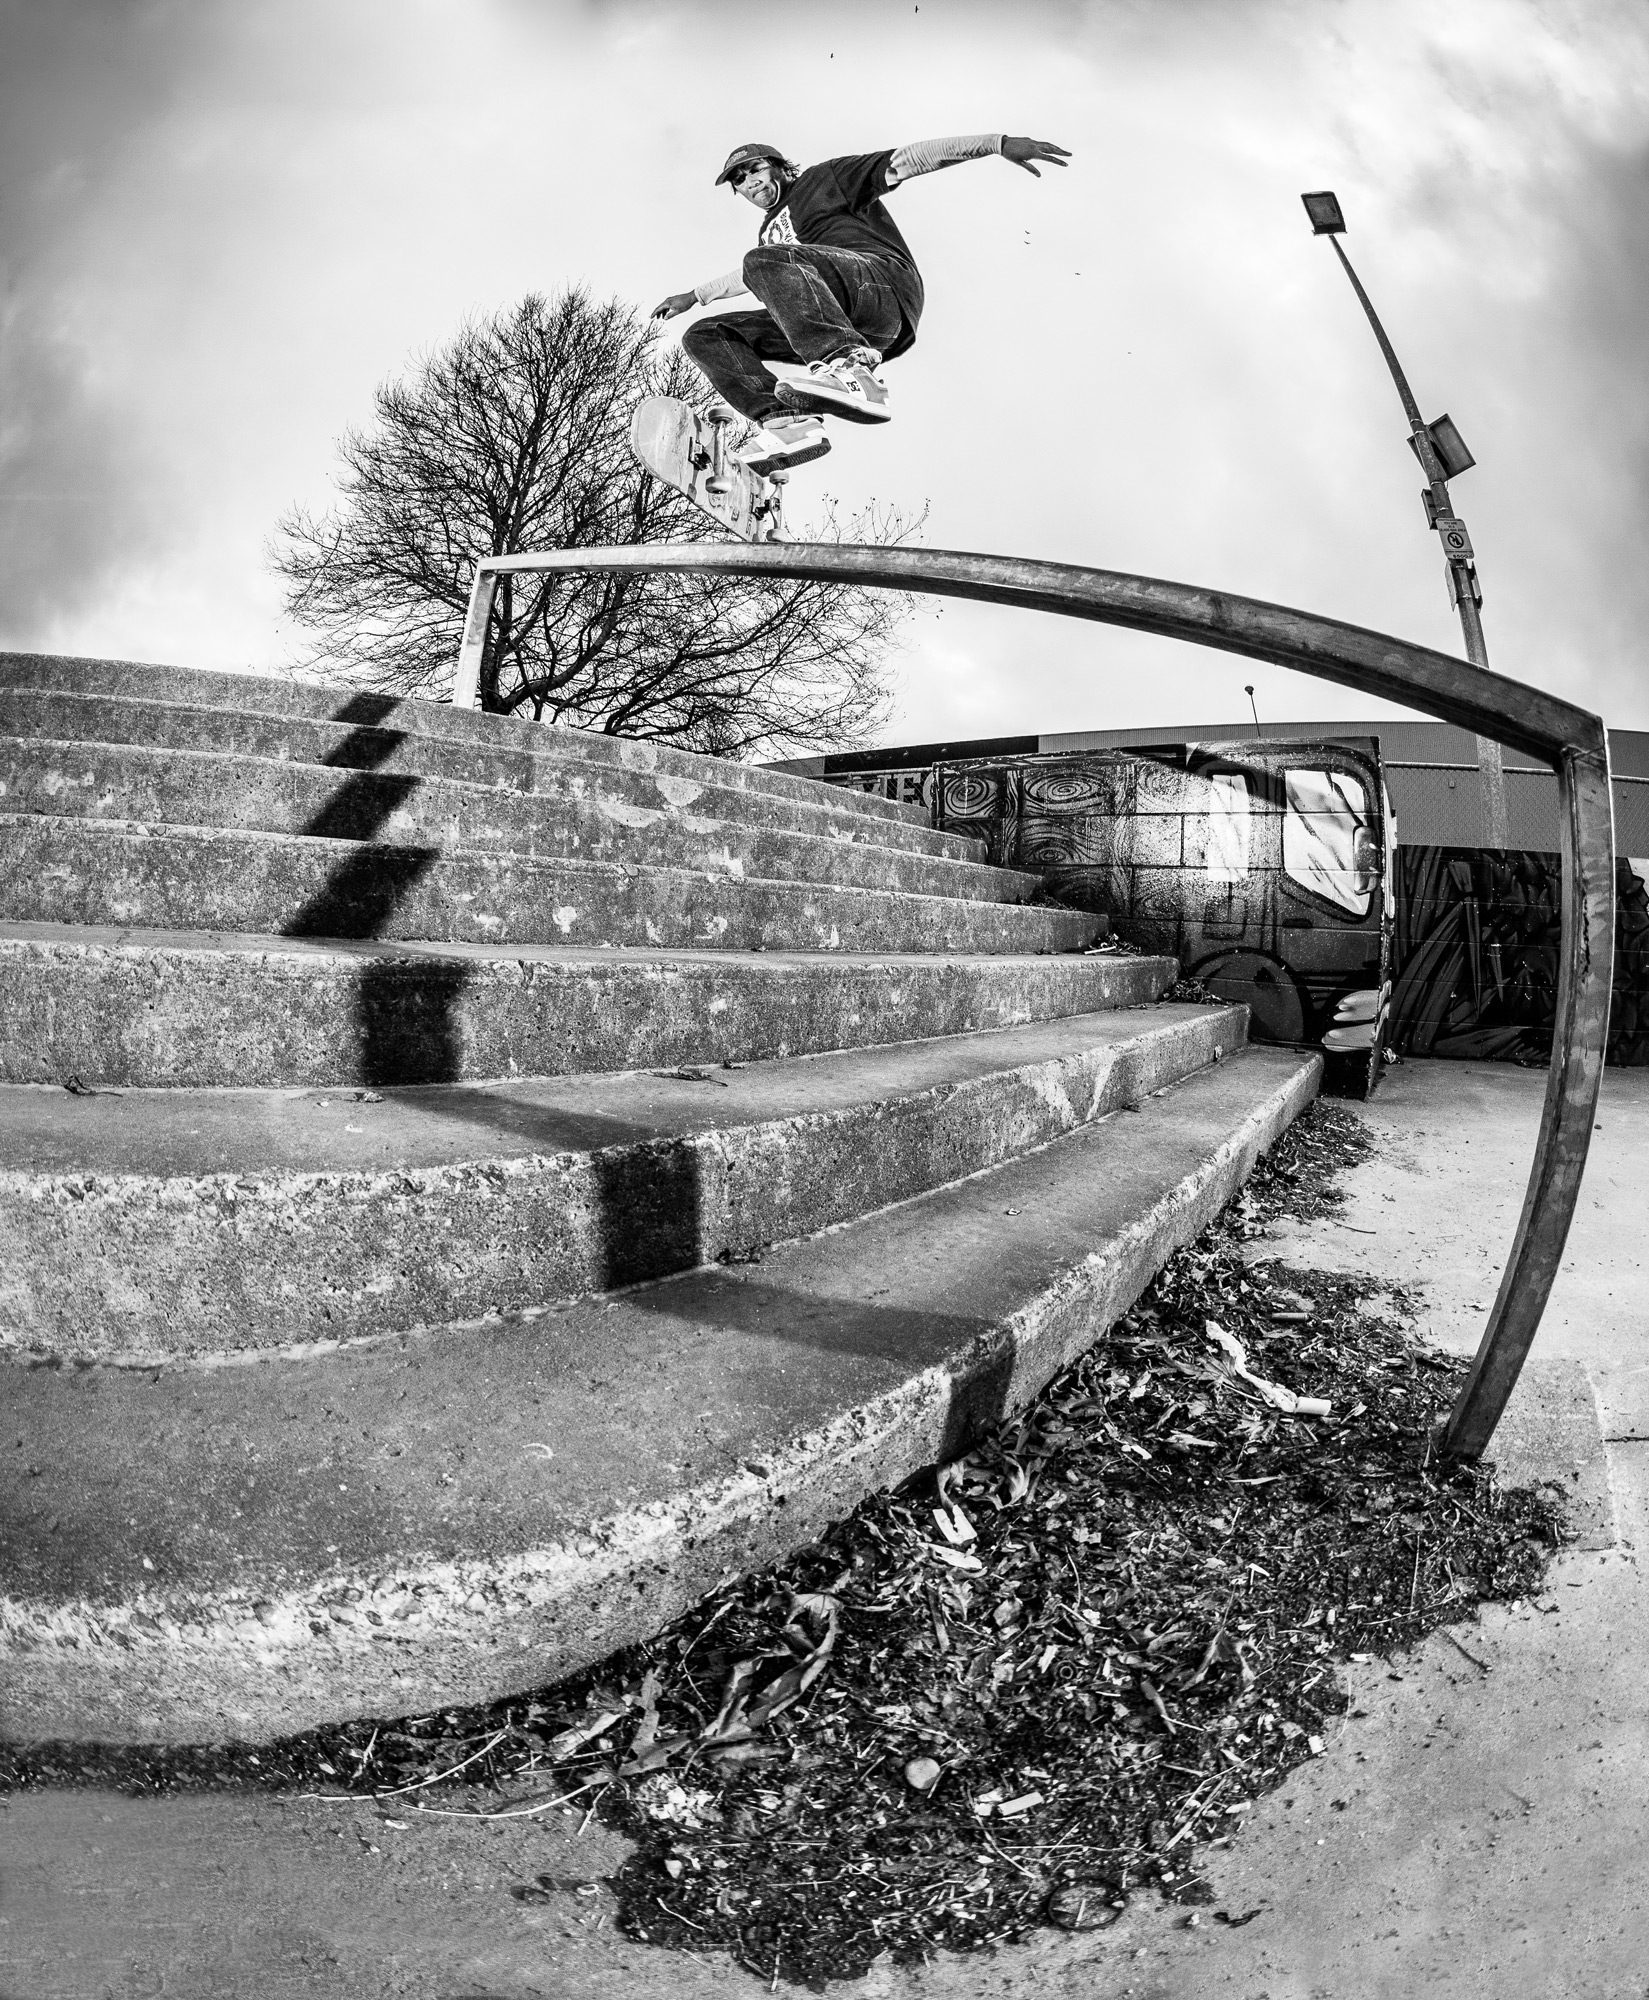 Black and white photo of Pauly Kauri doing a kickflip frontside boardslide at Ashburton Skatepark. The image is shot using a fisheye lens and is pointing up at the rail and Pauly from the ground.